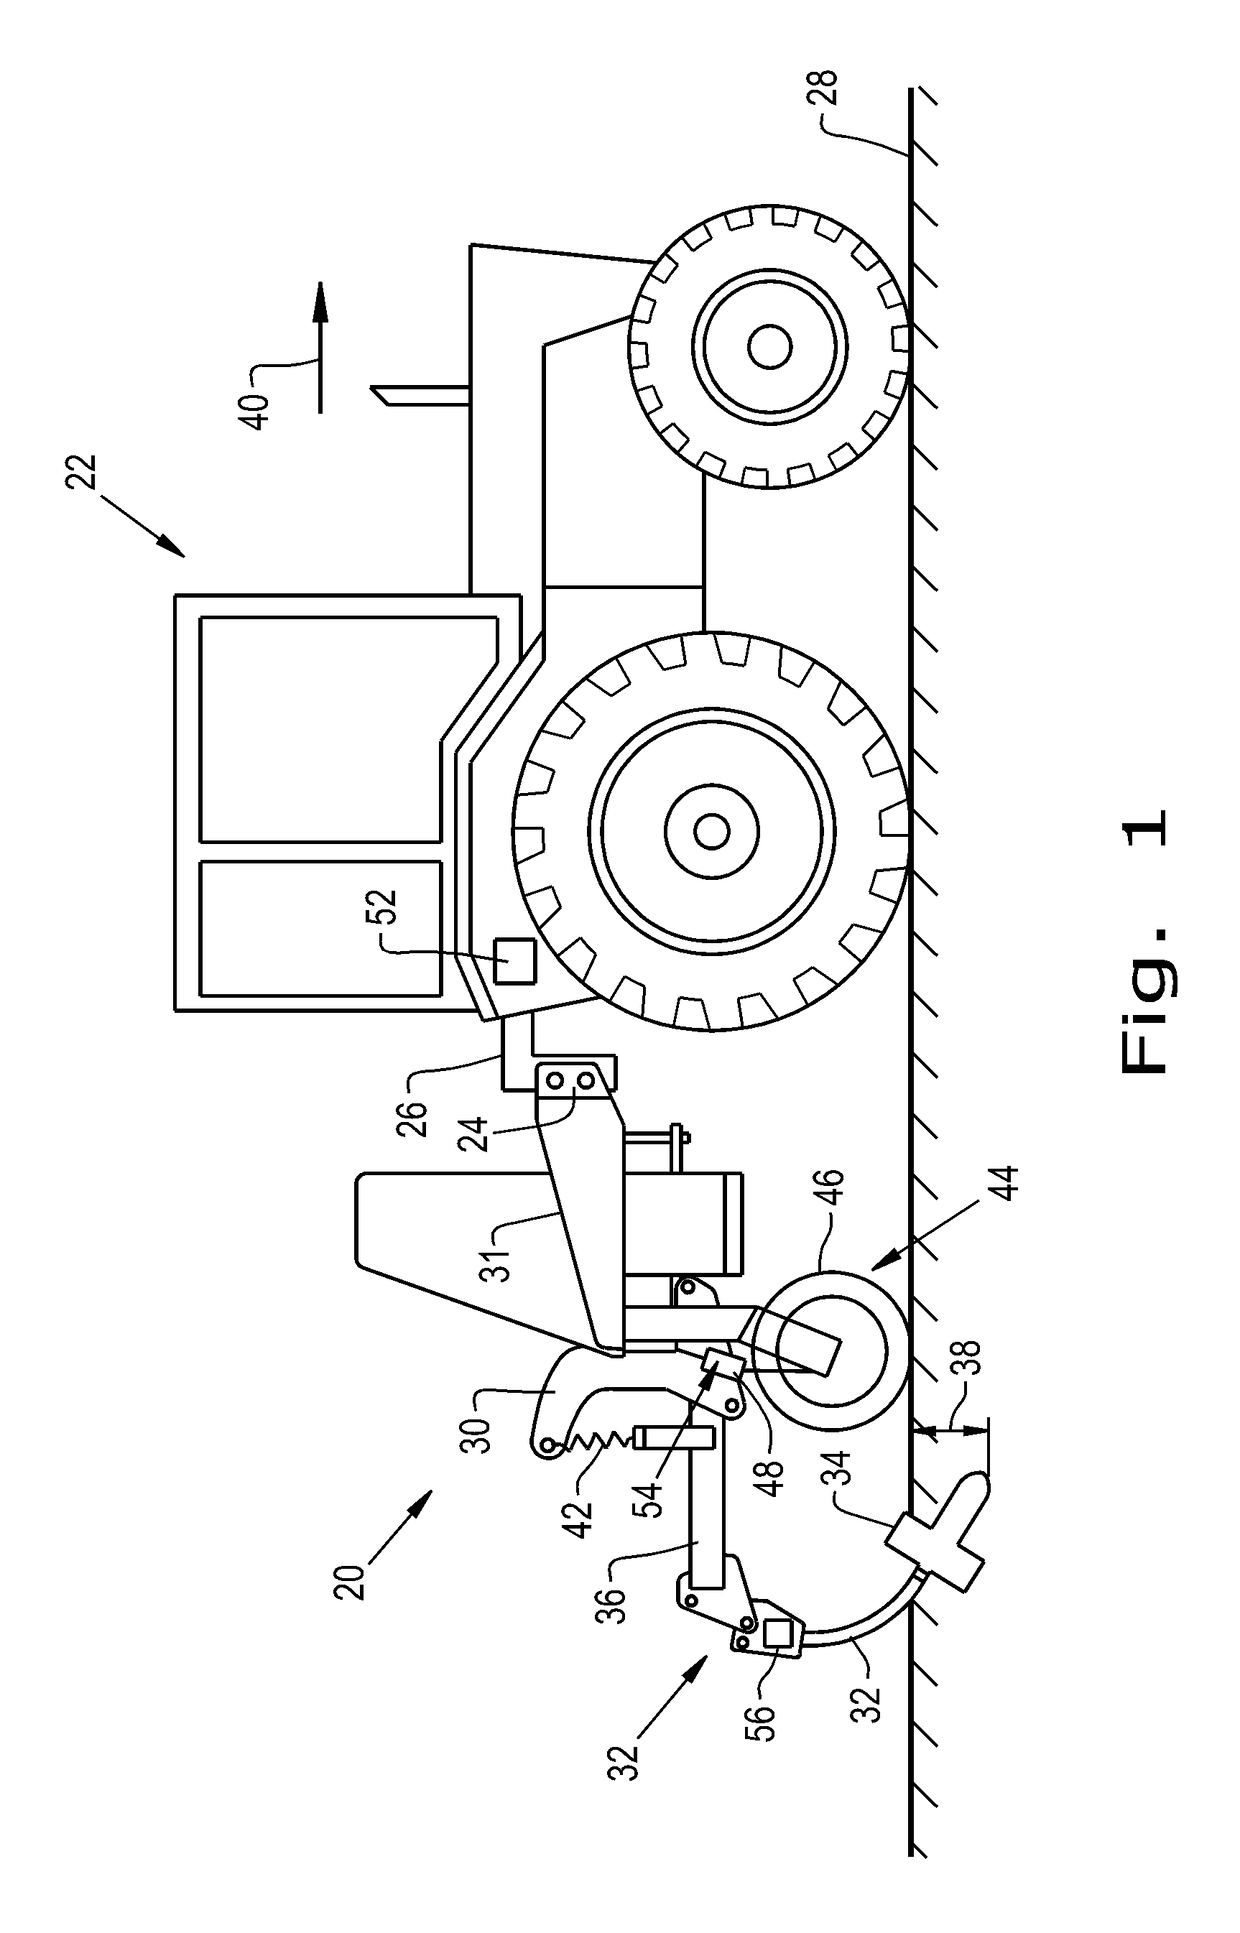 Agricultural implement with automatic shank depth control